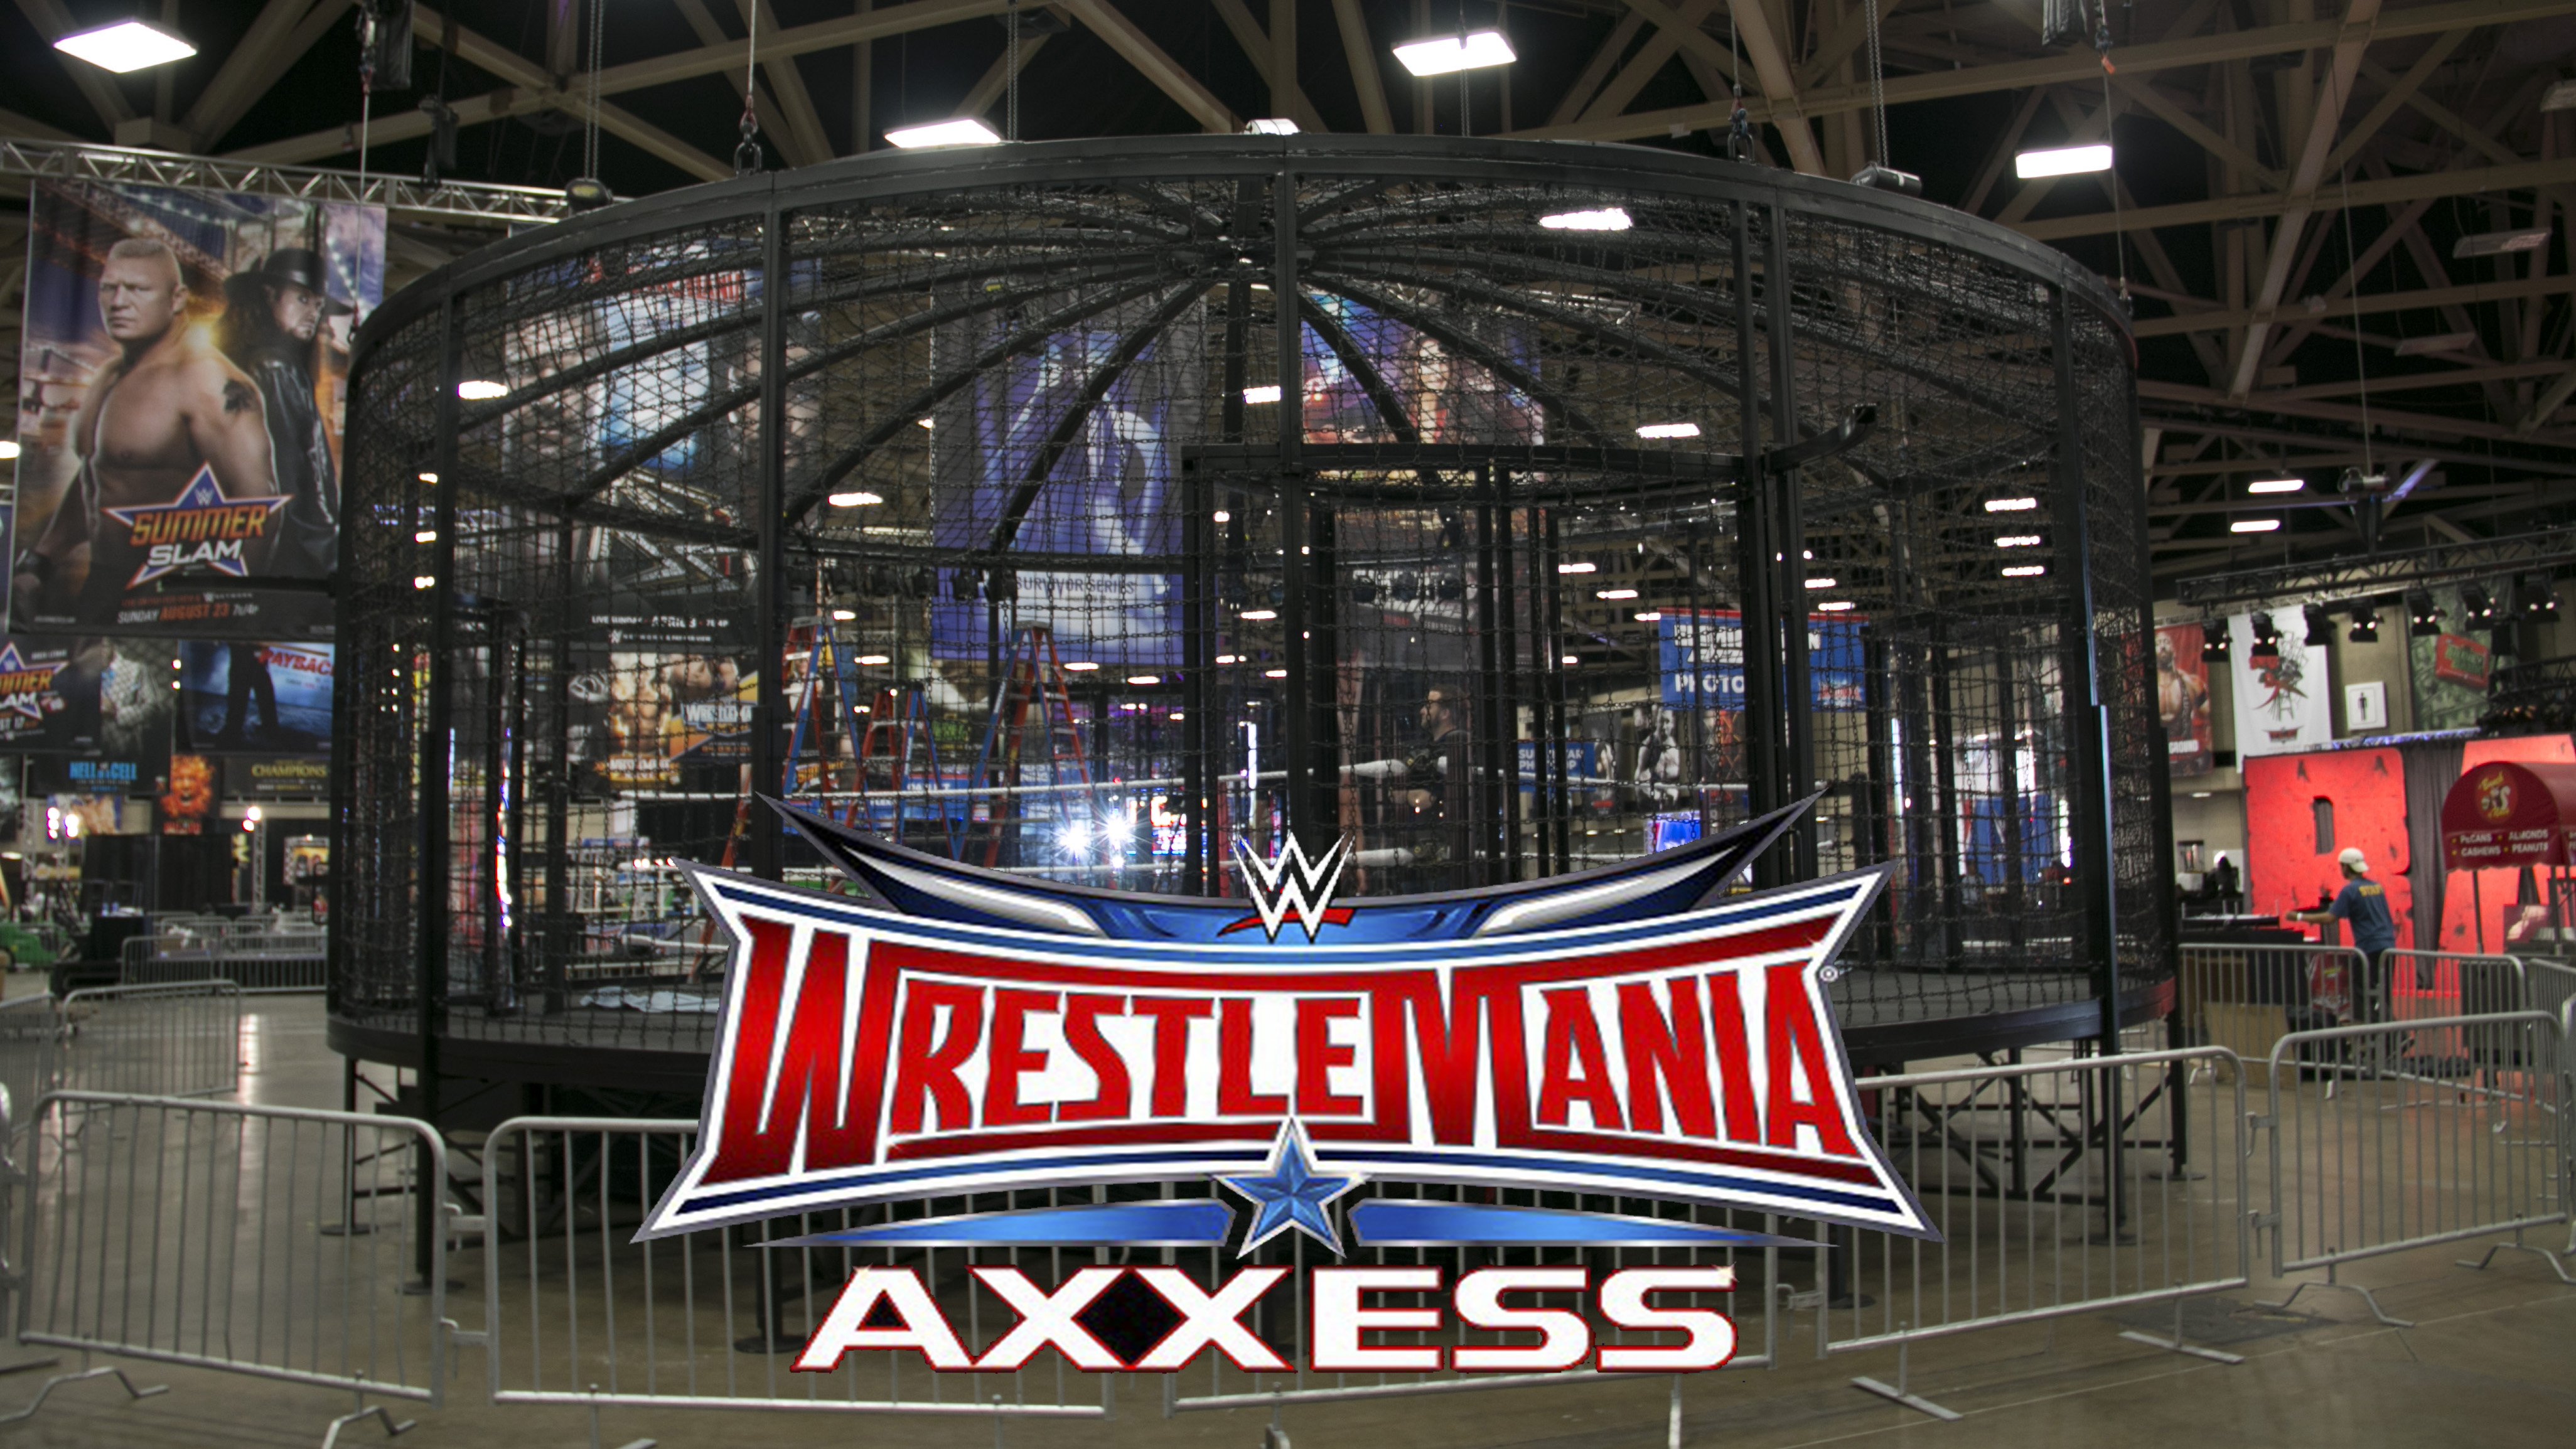 What to see at WWE Axxess